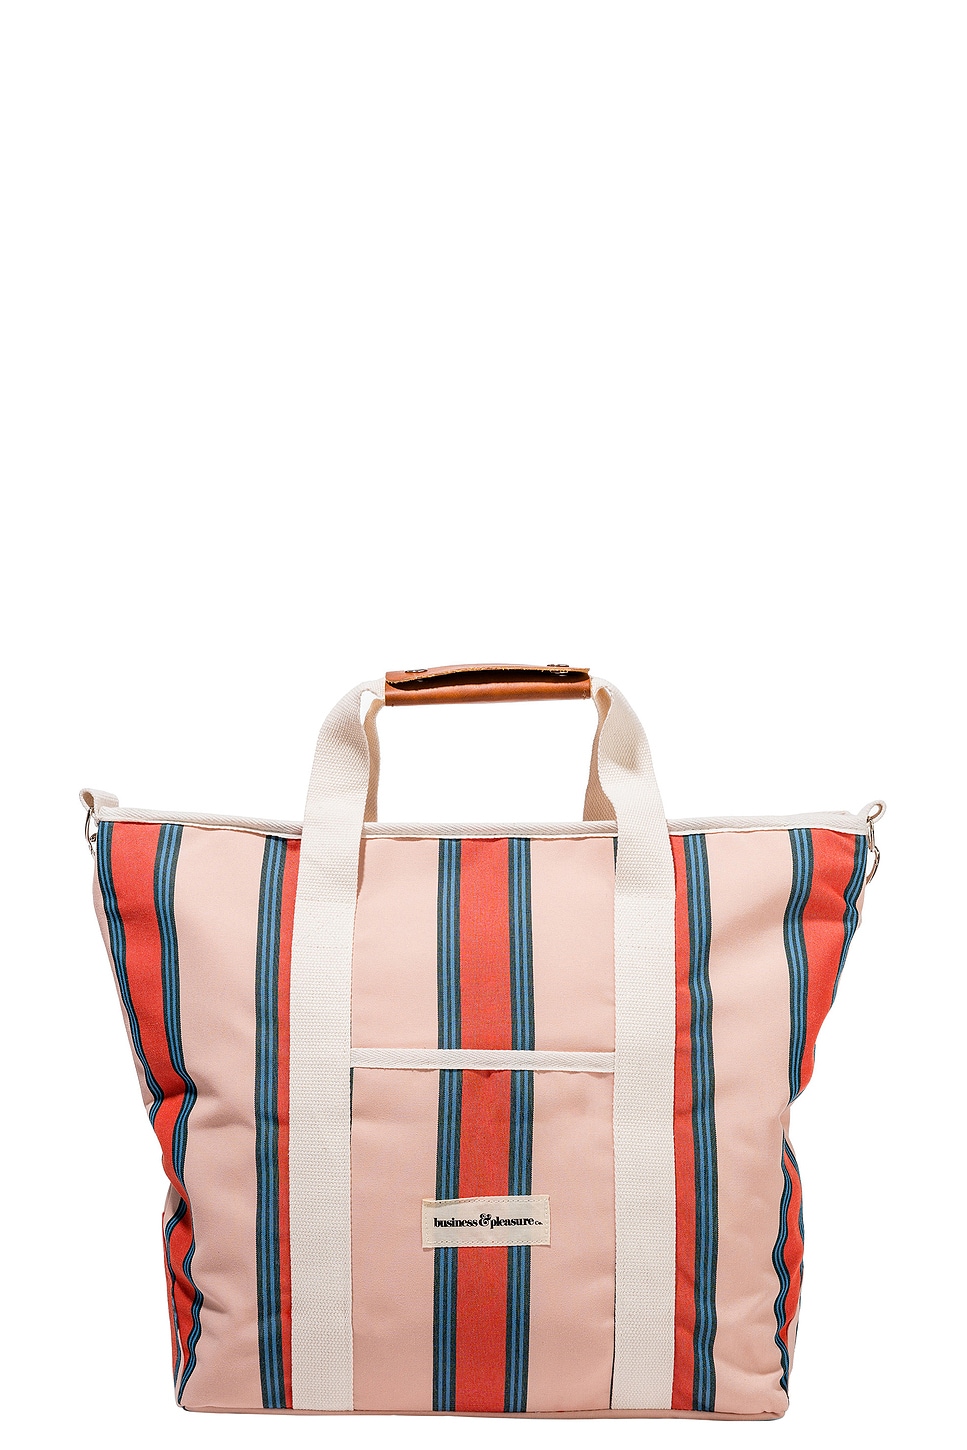 Image 1 of business & pleasure co. Cooler Tote Bag in Bistro Dusty Pink Stripe